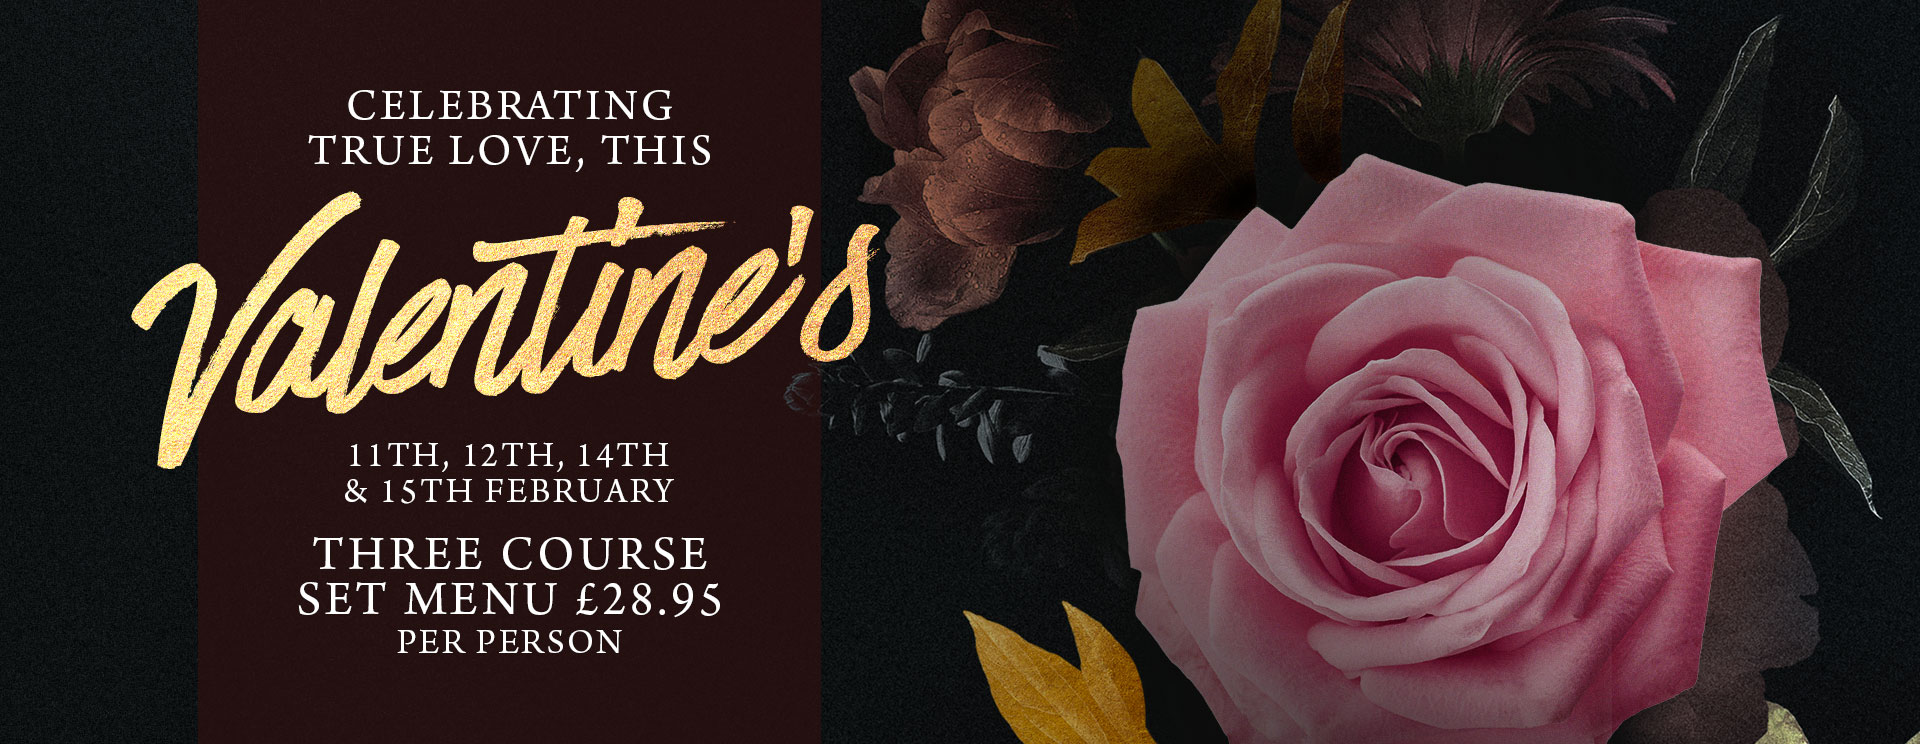 Valentines at The Hand & Sceptre